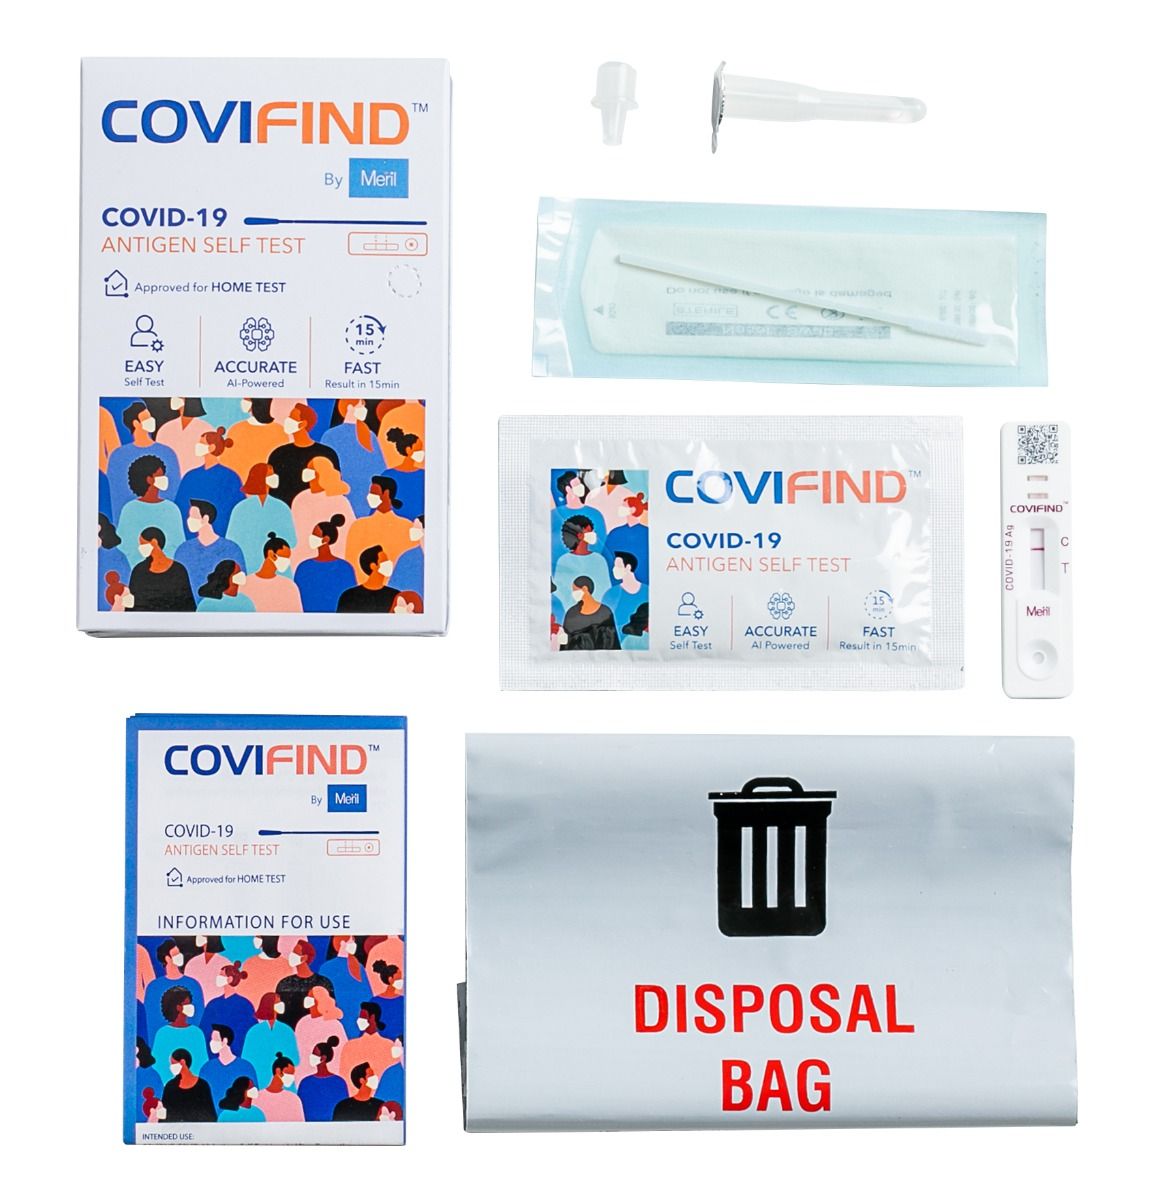 COVIFIND Covid-19 Antigen Self Test Kit, 1 Count, Pack of 1 